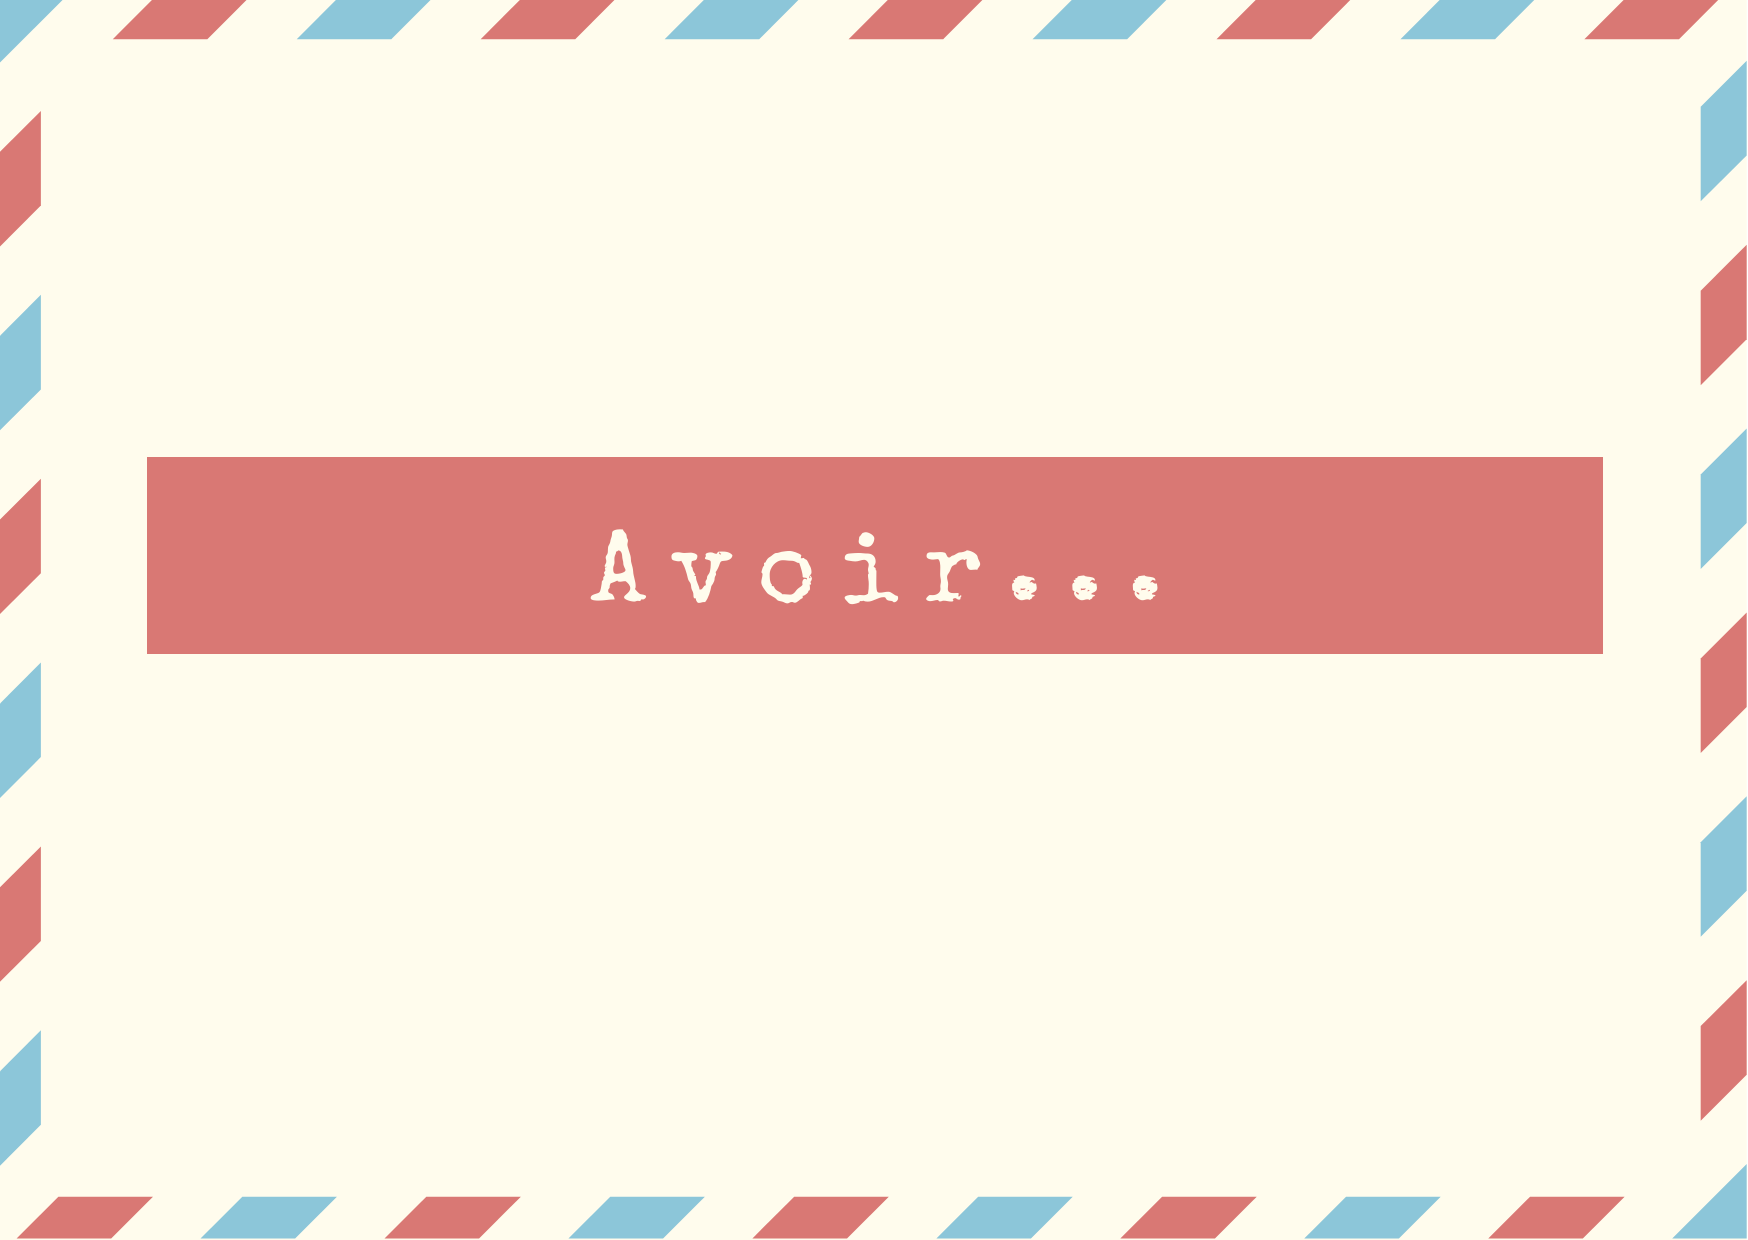 Image shows a text box with "Avoir," the French verb for "to have"